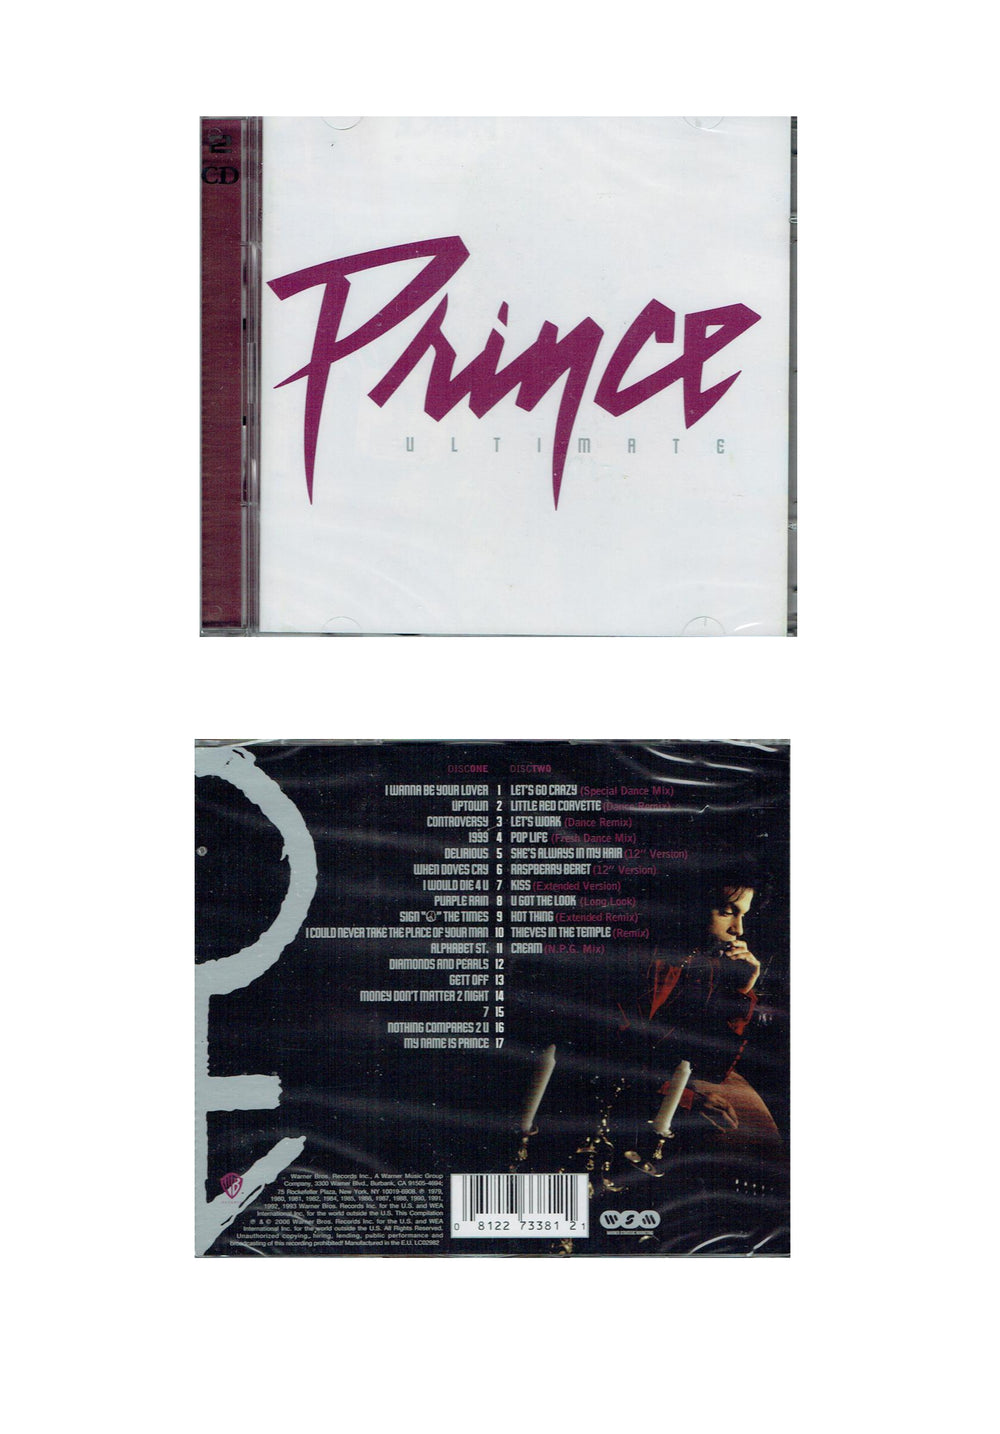 Prince Ultimate 2 CD Hits & 12 Inch Set Sealed Brand New CD Album